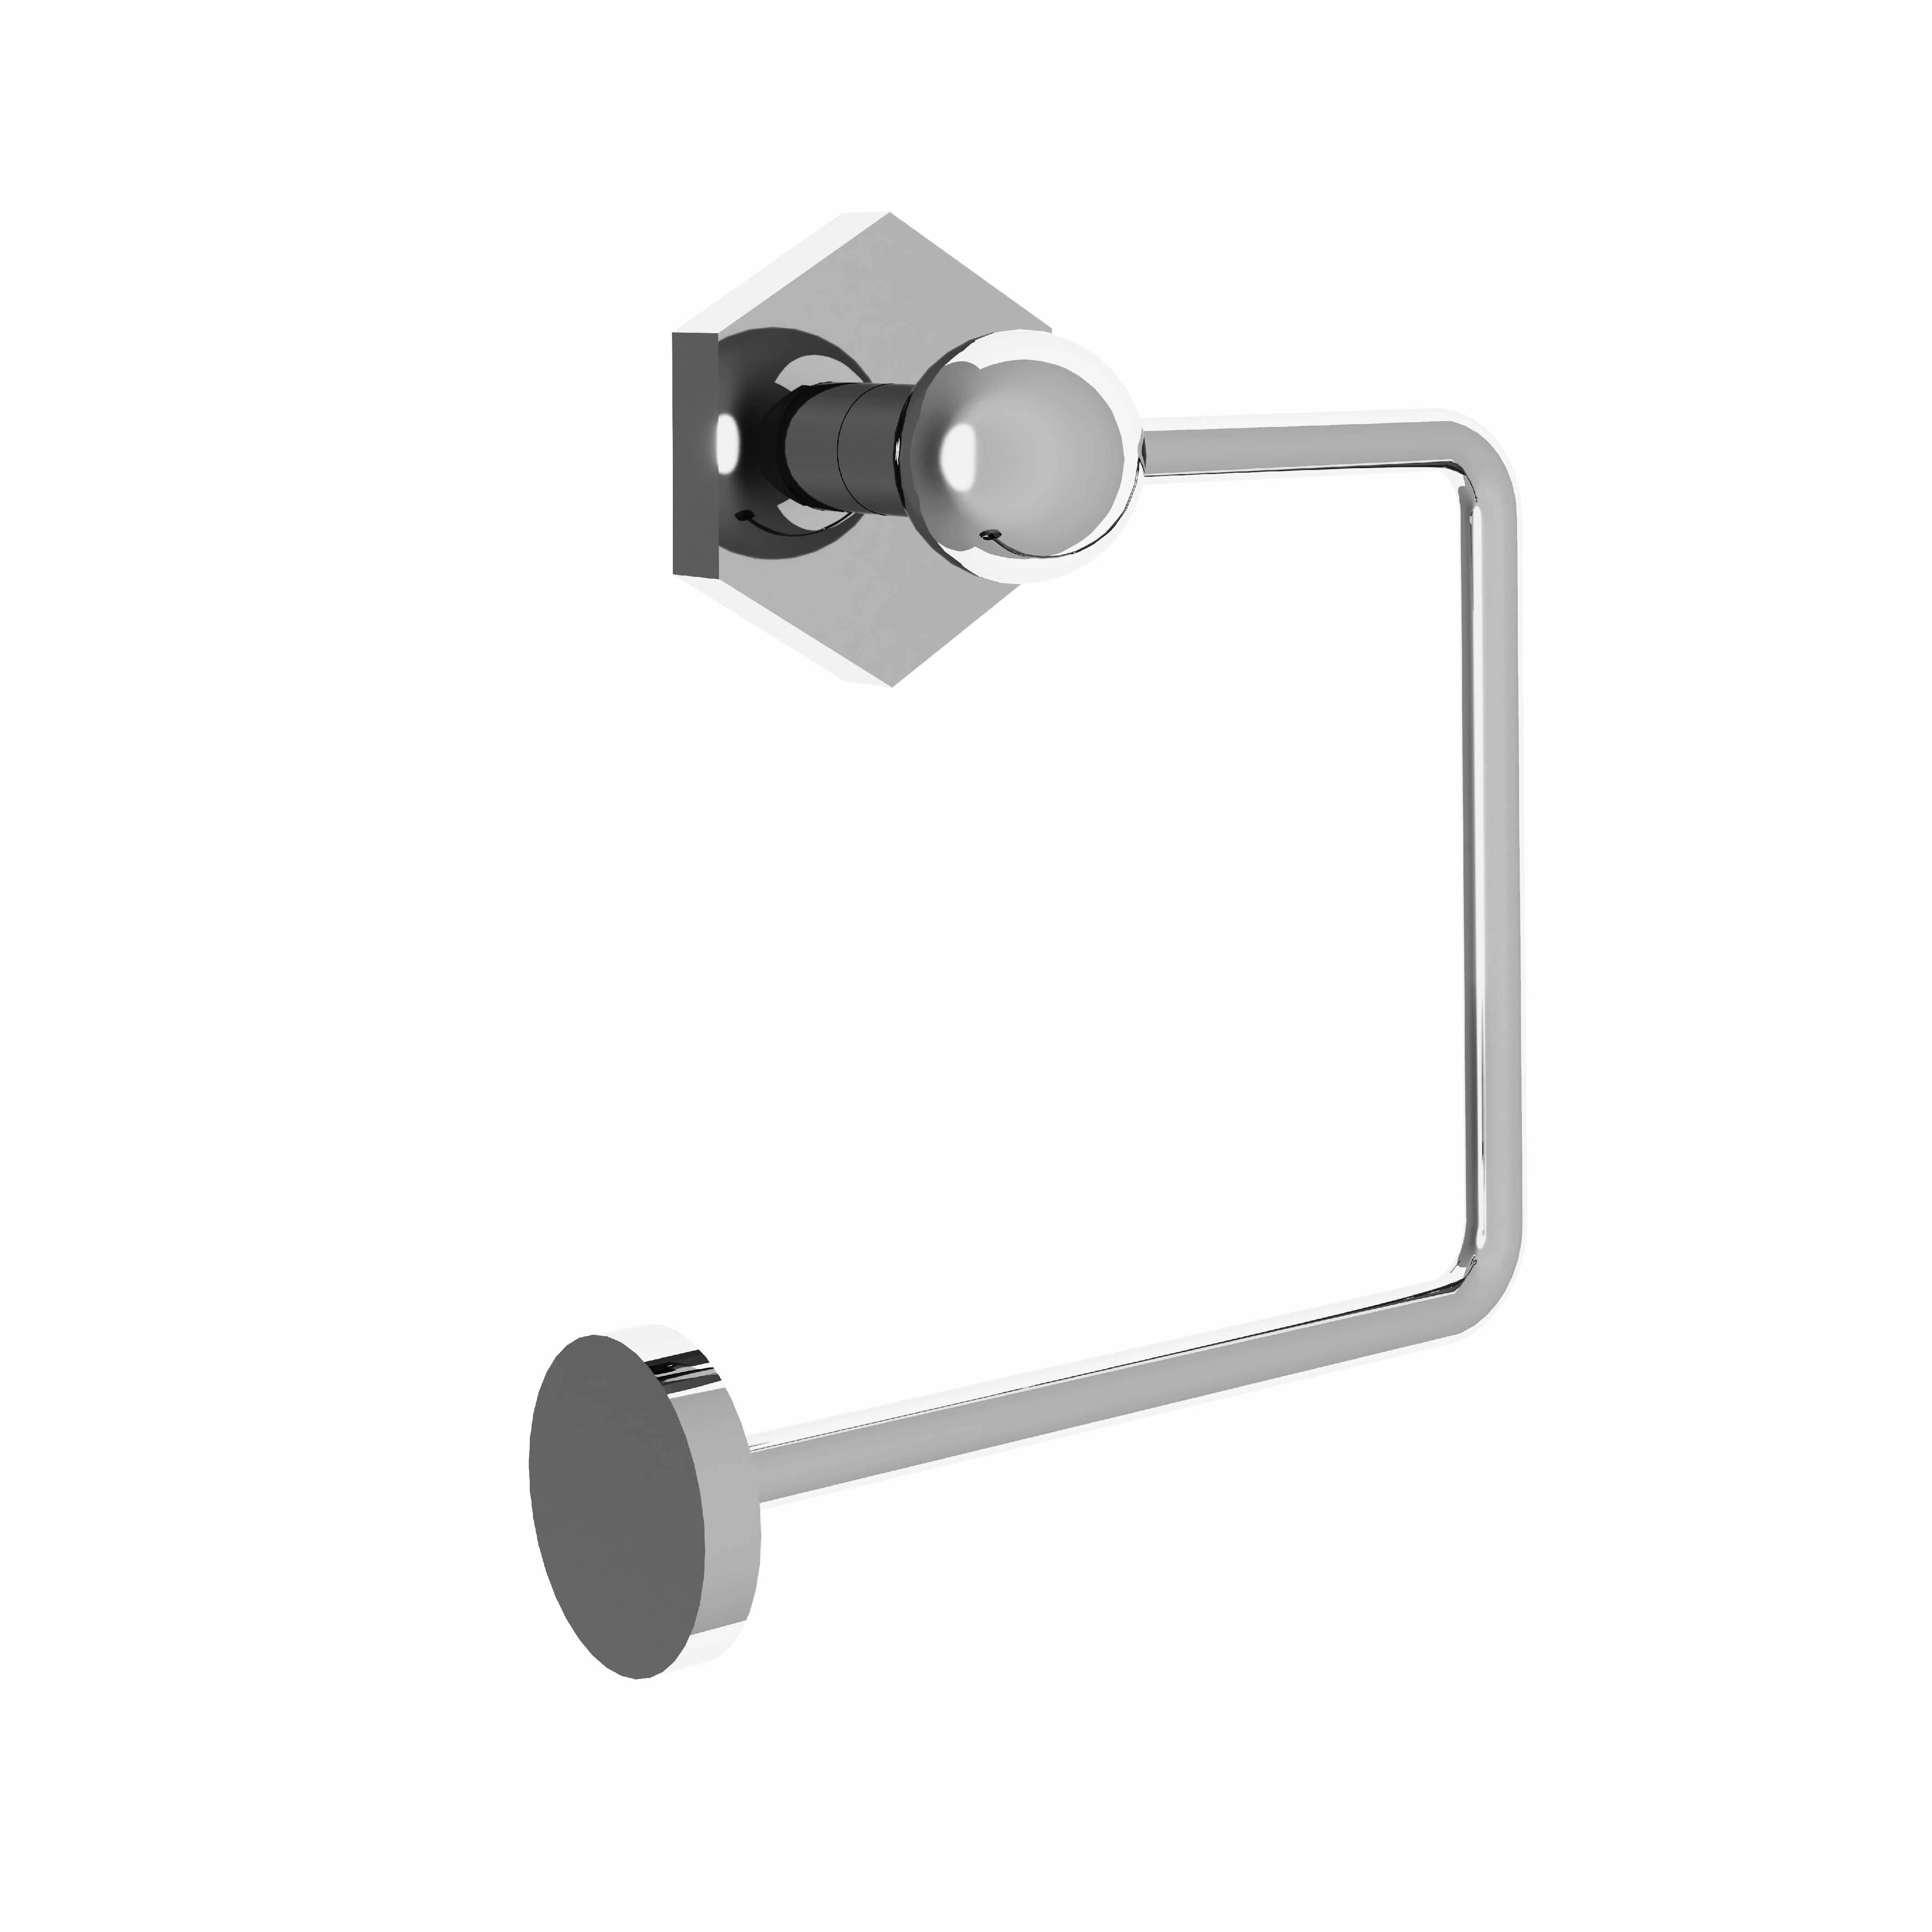 M32-504 Toilet roll holder without cover